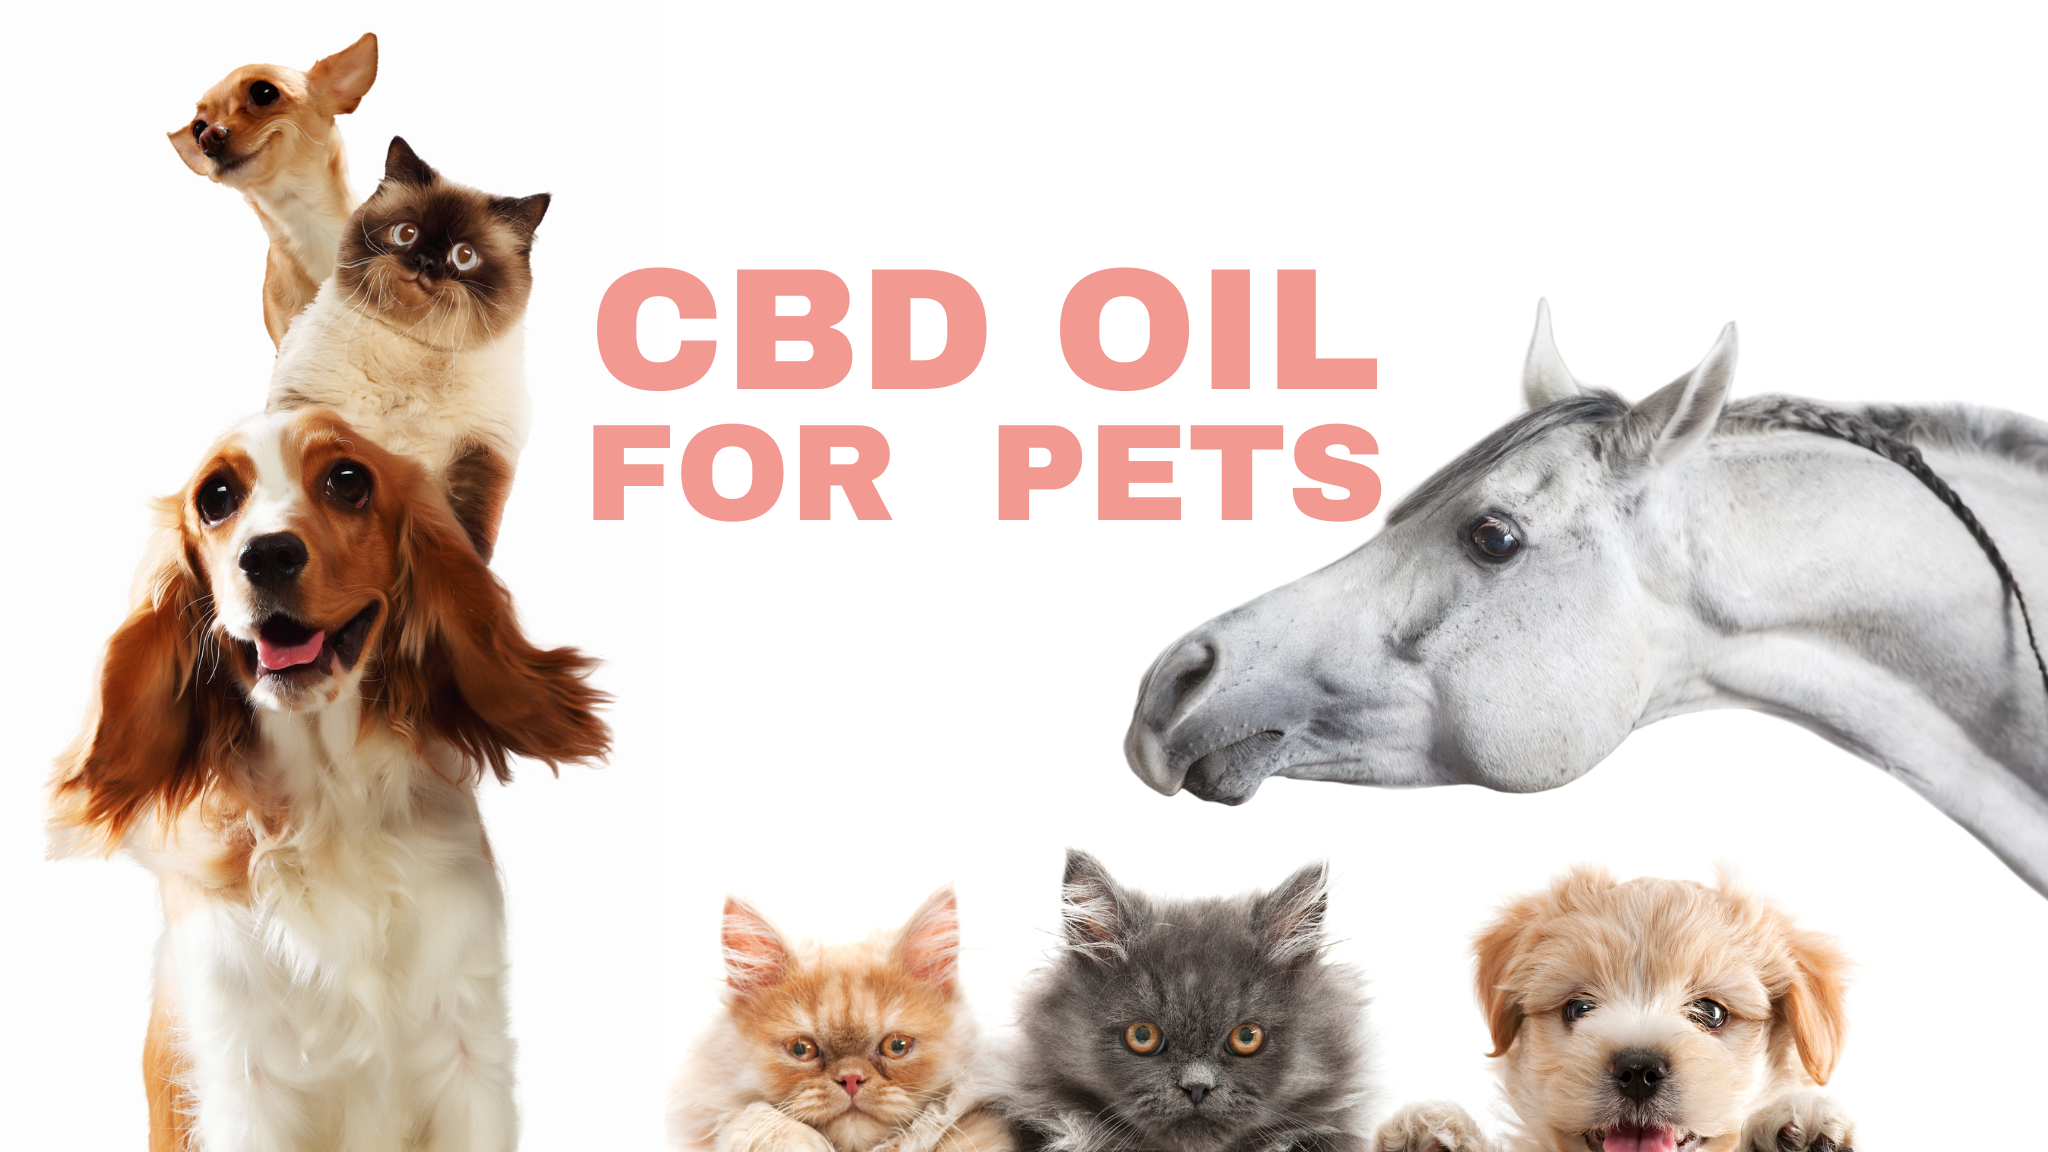 CBD Oil for Pets: Benefits and Uses